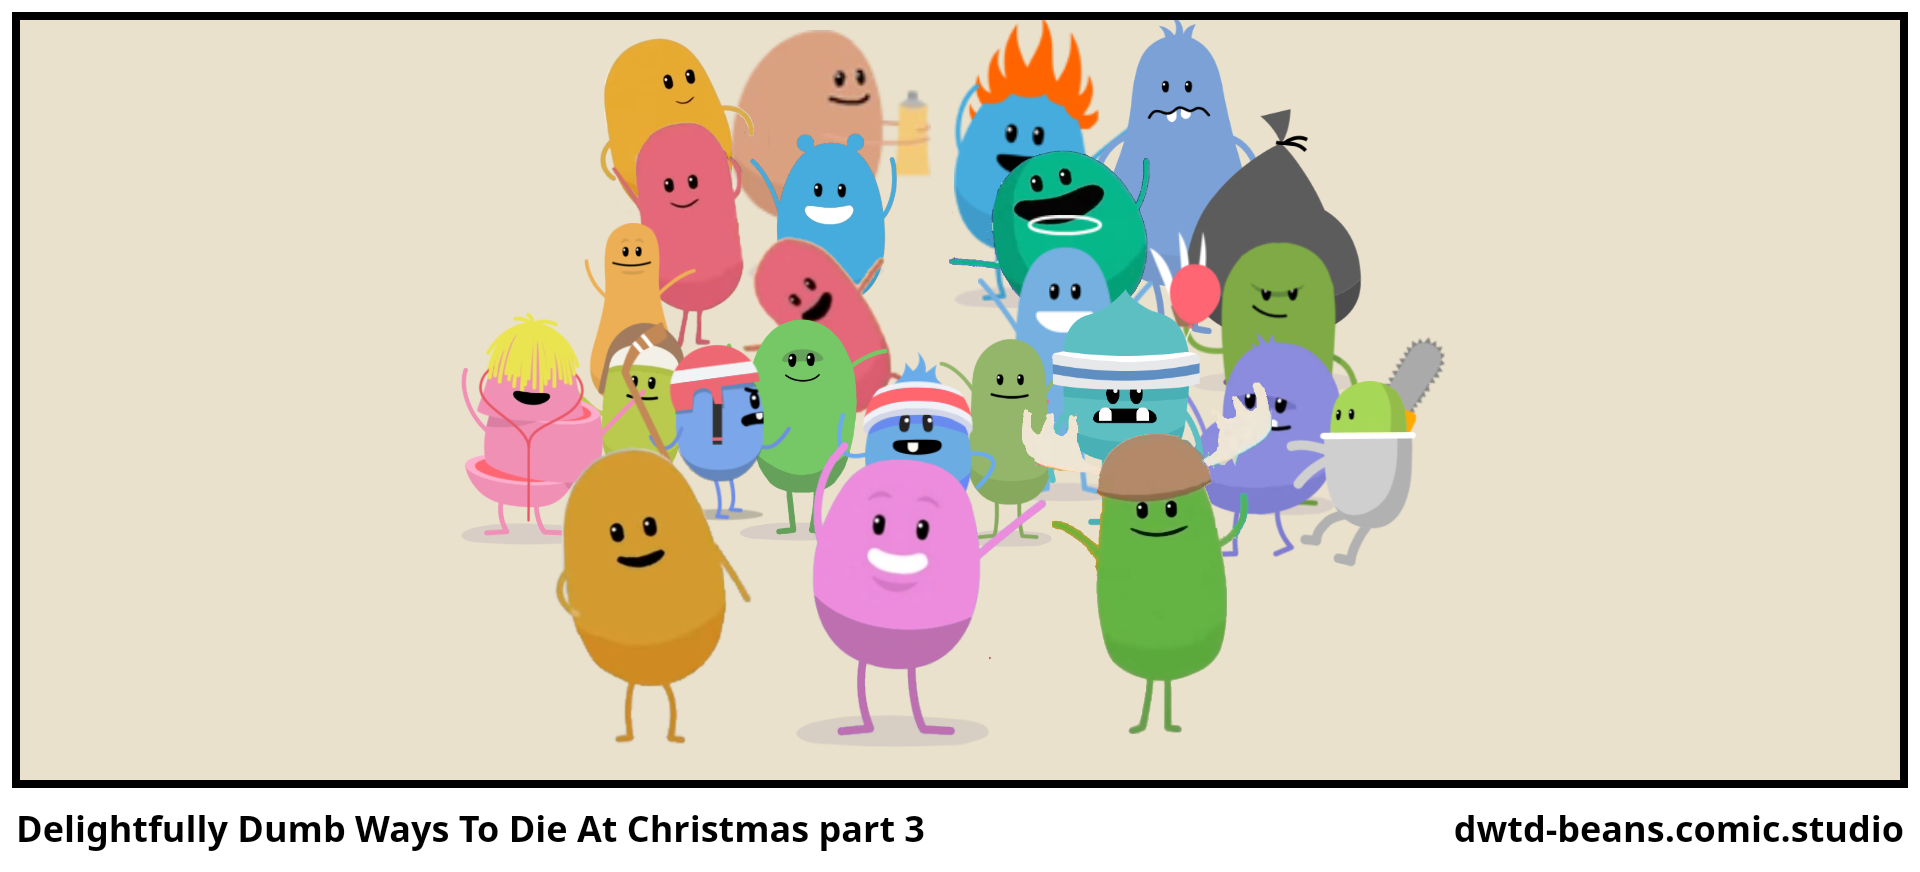 Delightfully Dumb Ways To Die At Christmas part 3